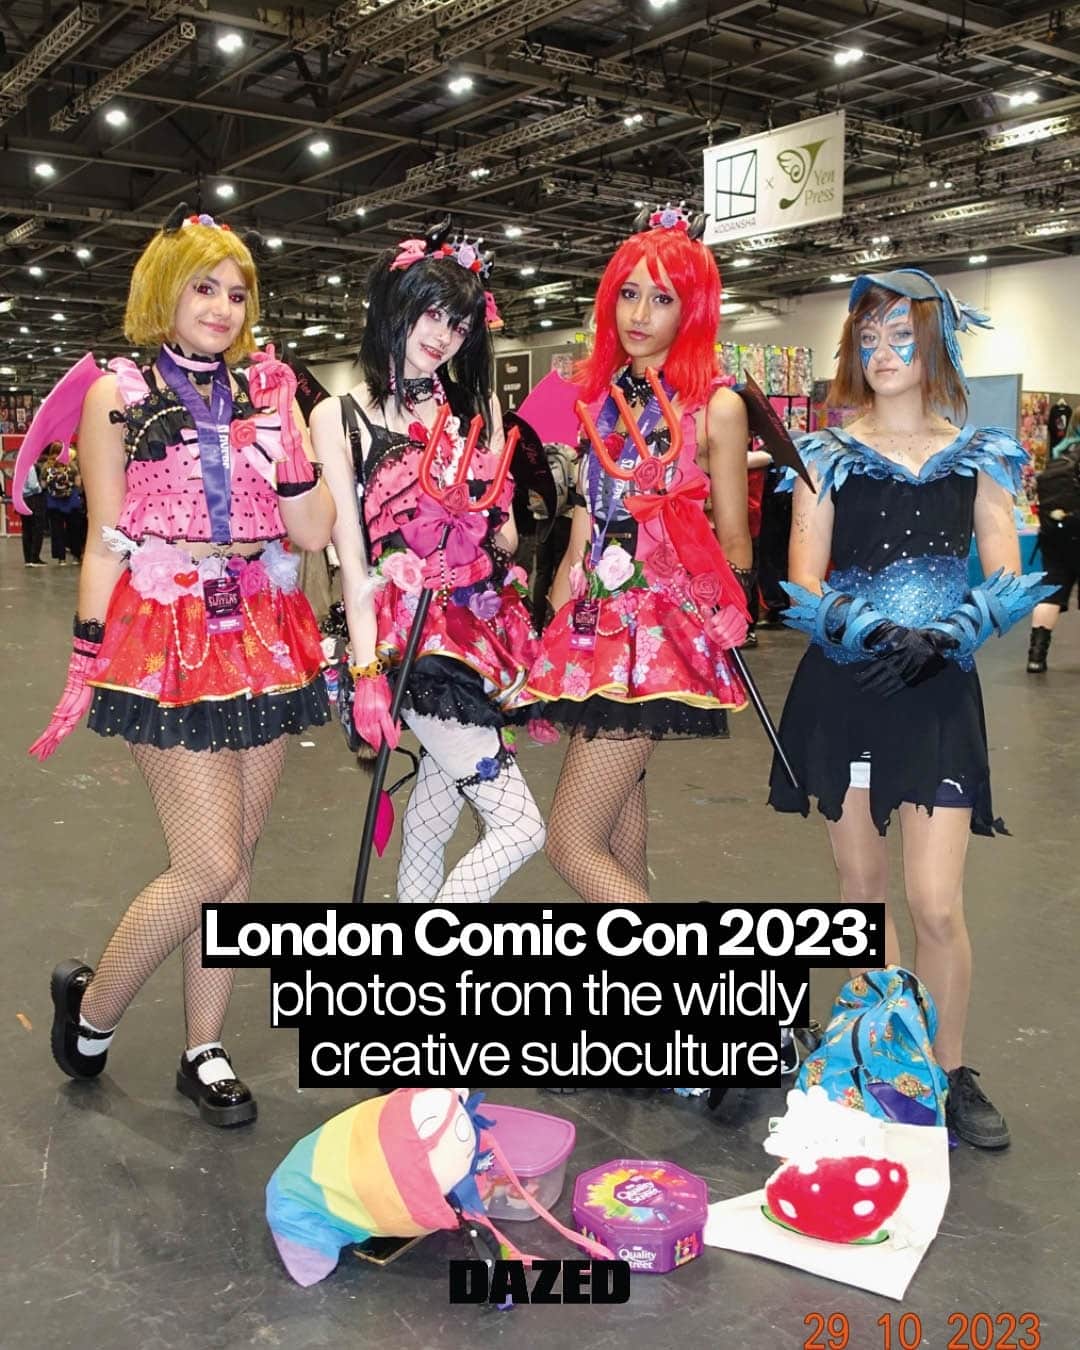 Dazed Magazineのインスタグラム：「@hysteric.fashion photographer Daisy Davidson captures the weird and wonderful universe of Britain’s cosplay community at @mcmcomiccon 😛⁠ ⁠ Taking place inside the self-contained fantasy universe of @excellondon the three-day epic is where pop culture meets cosplay, with attendees dressed in brightly coloured and brilliantly elaborate costumes, from Pikachus and pink-haired Lolitas to the Piranha plant from Mario and an endless cast of Baldur’s Gate characters.⁠ ⁠ “MCM Comic Con is such a nostalgic place for me, I first went there back in 2005 as Ichigo from Tokyo Mew Mew when it was really the only place you could connect with other anime and manga fans except for random forums,” says photographer Daisy Davidson. ⁠ ⁠ “It’s evolved so much over the years but it still has such an earnest energy as a place where people can connect with one another about what they love and express it in their own way via cosplay.”⁠ ⁠ See more through the link in our bio 🔗⁠ ⁠ 📷 @hysteric.fashion⁠ ✍️ @gunseliiiiii⁠ ⁠ #cosplay #comiccon ⁠」